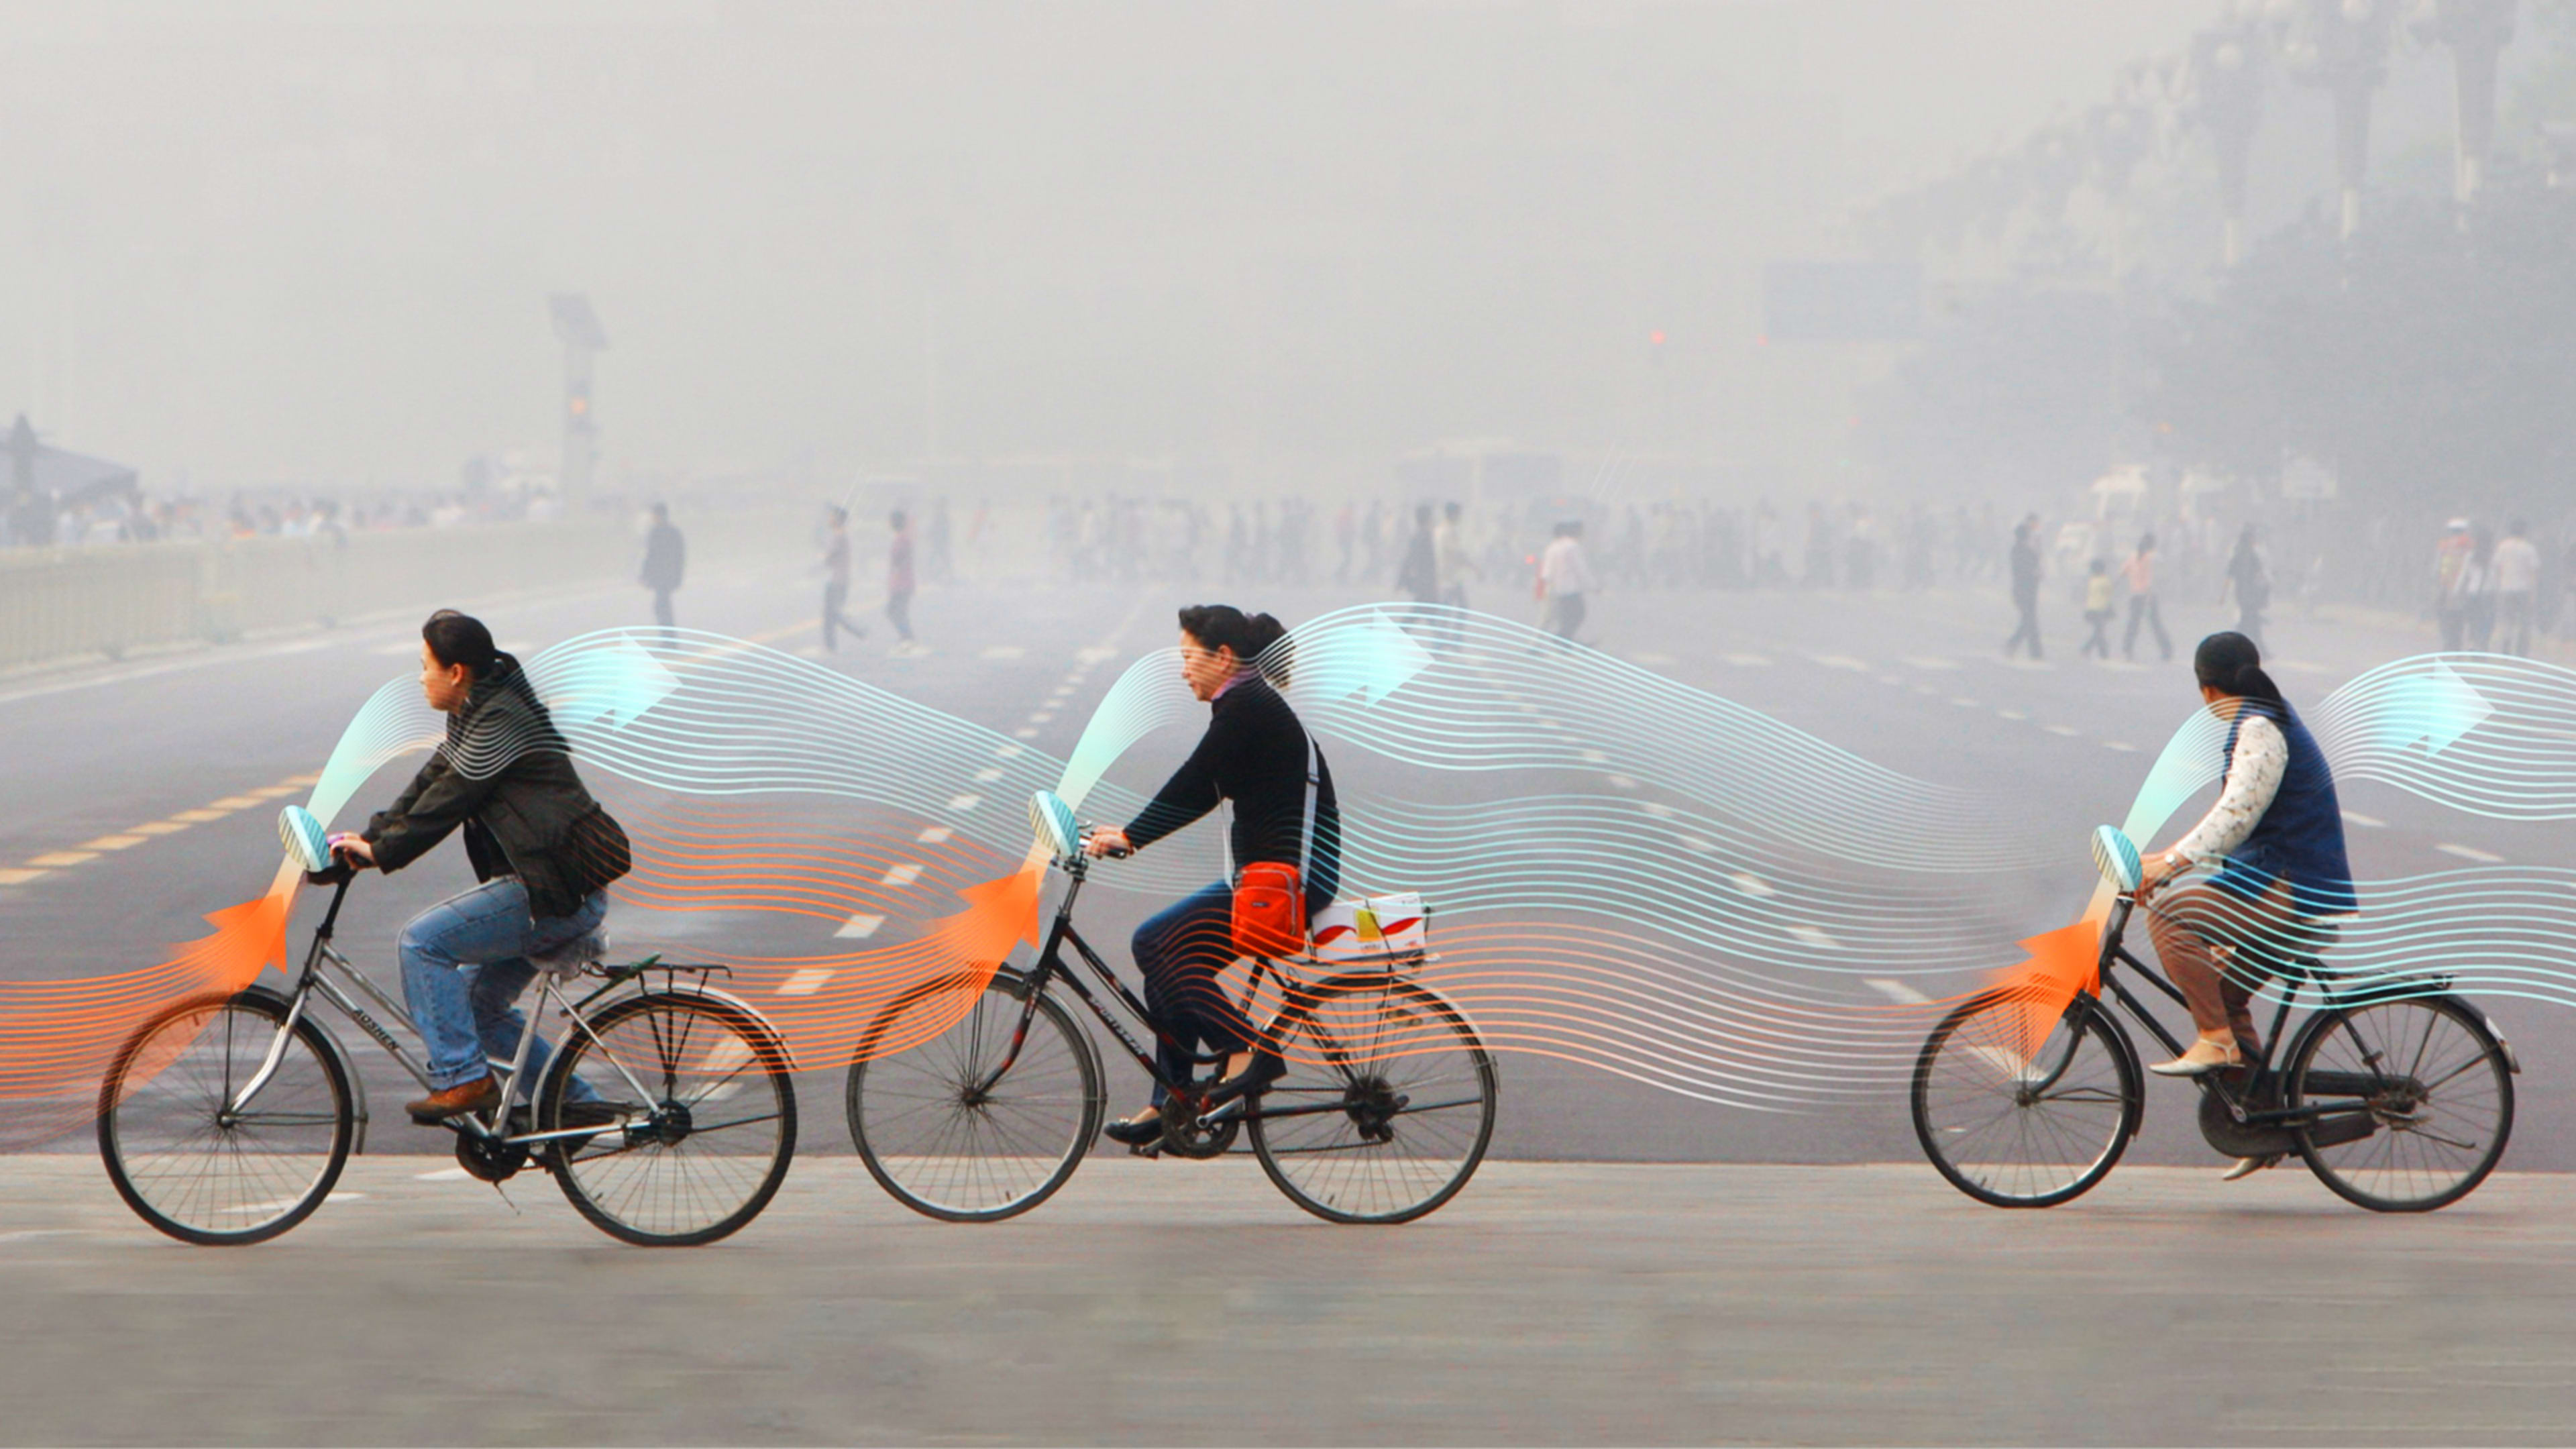 What If You Could Filter Dirty Air Just By Riding A Bike?